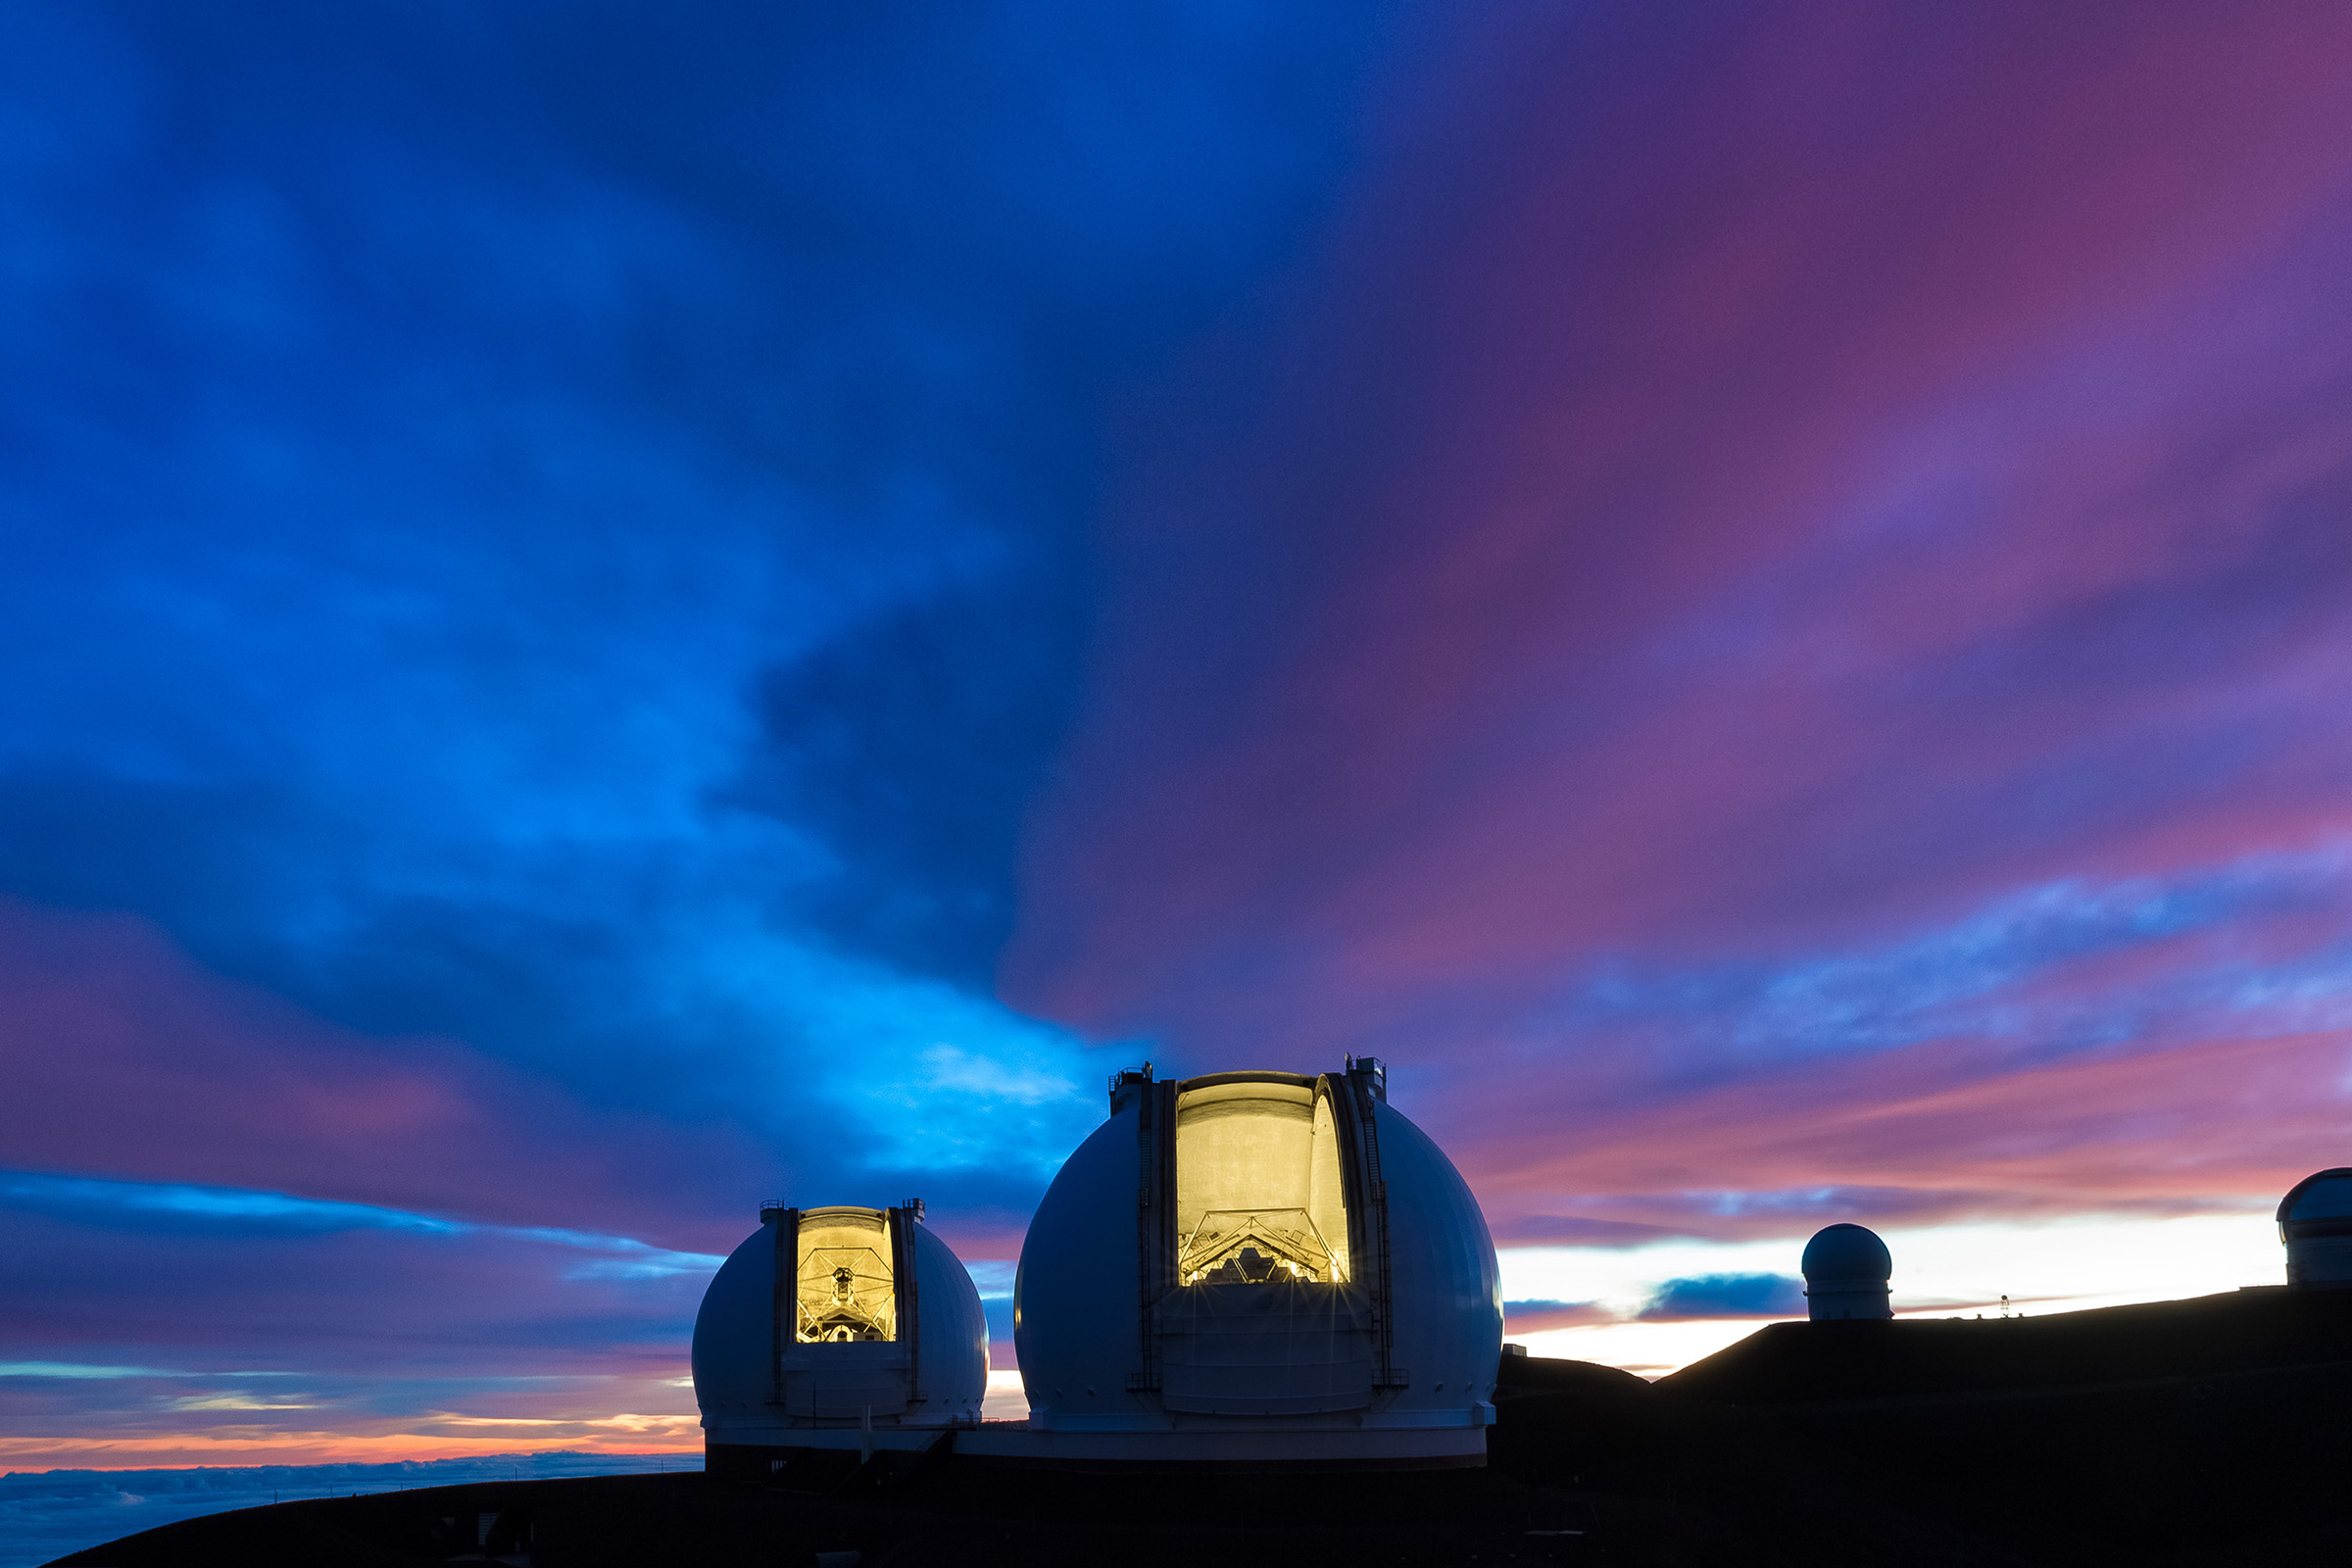 Two telescope domes silhouetted by sunlight creeping over the horizon beneath a blue and purple sky